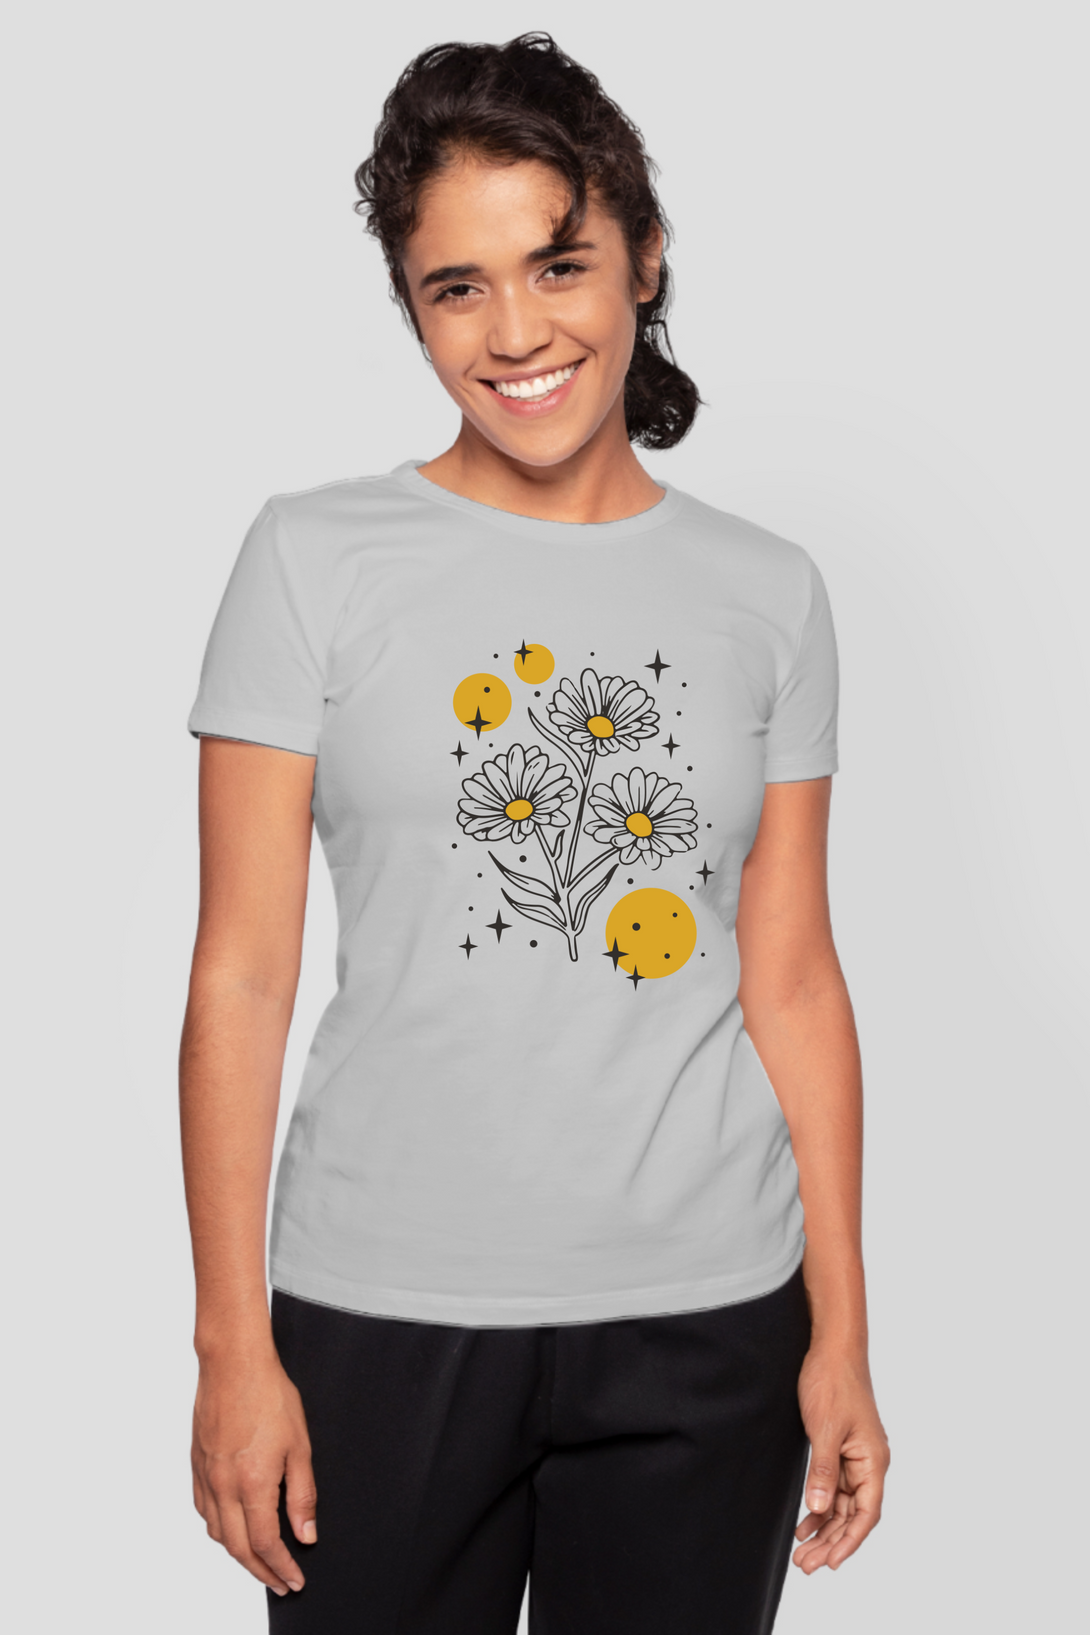 Sparkling Flowers Printed T-Shirt For Women - WowWaves - 9